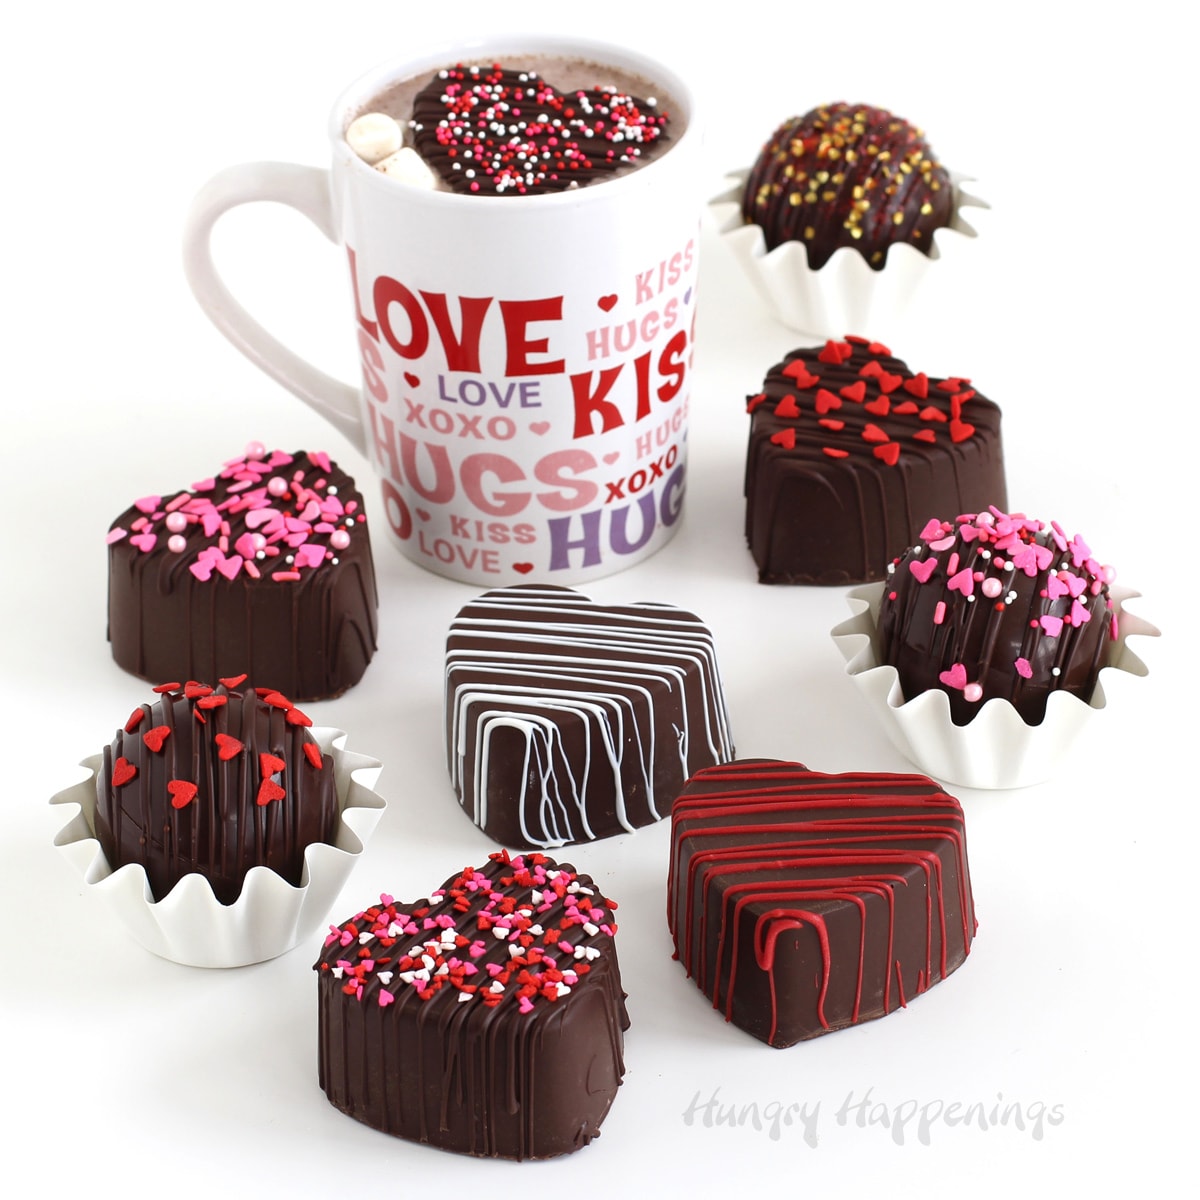 Valentine's Day hot chocolate bombs hearts and spheres alongside a Valentine's Day mug filled with hot chocolate.